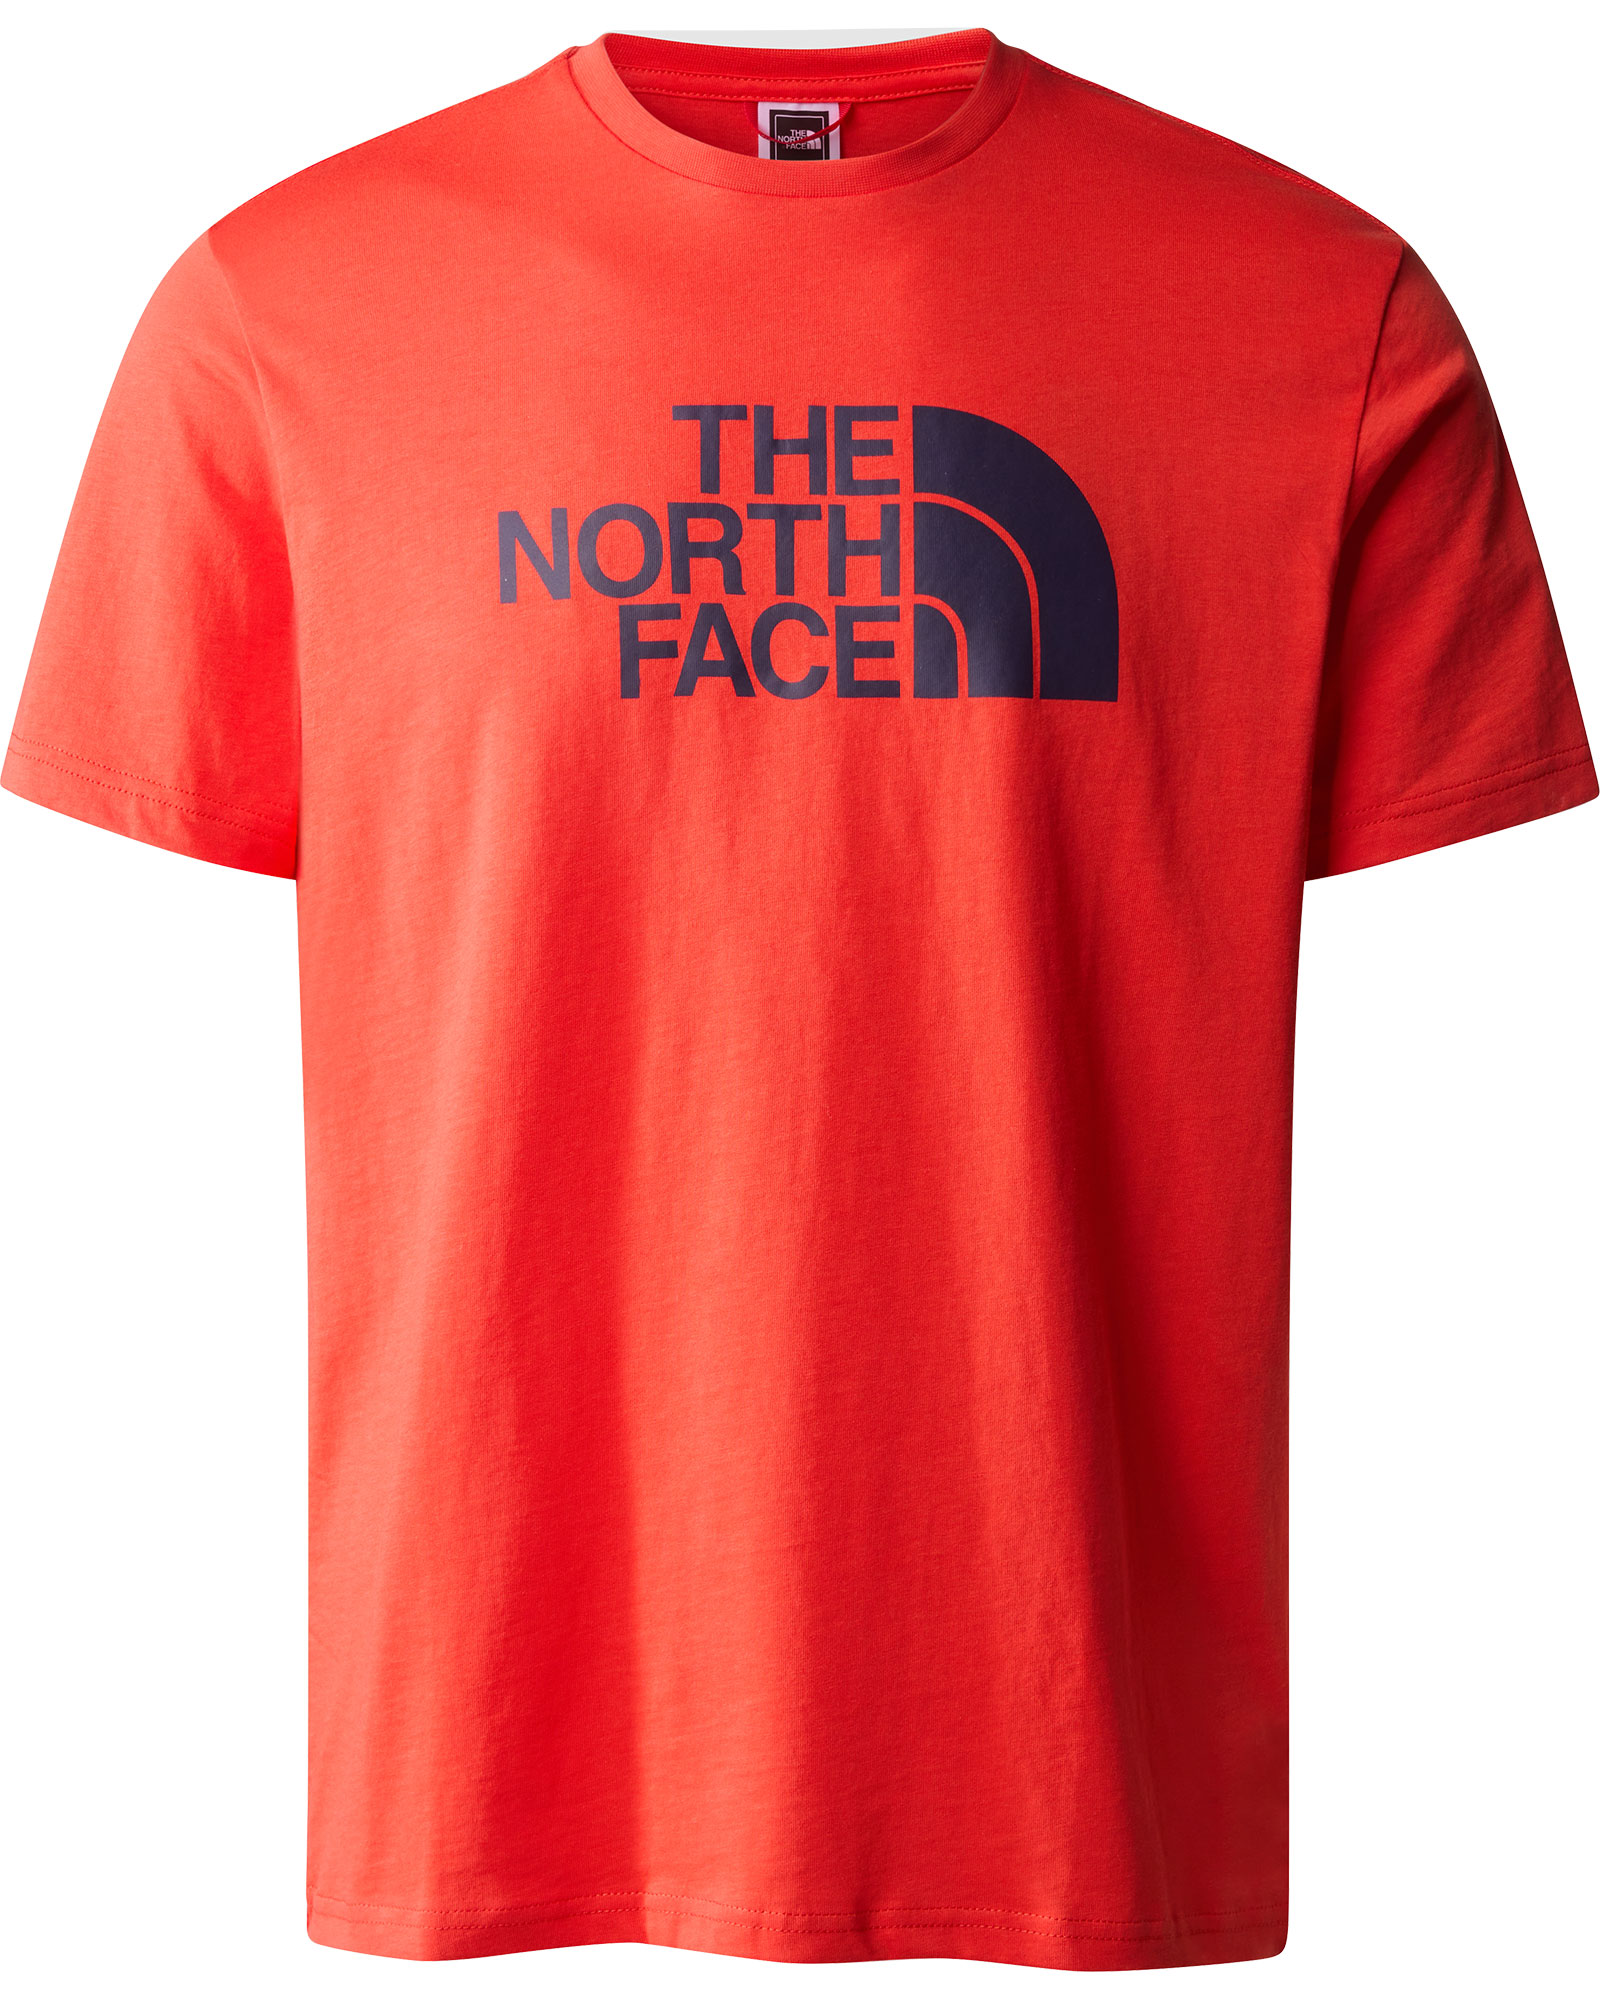 The North Face Easy Men’s T Shirt - Fiery Red XL